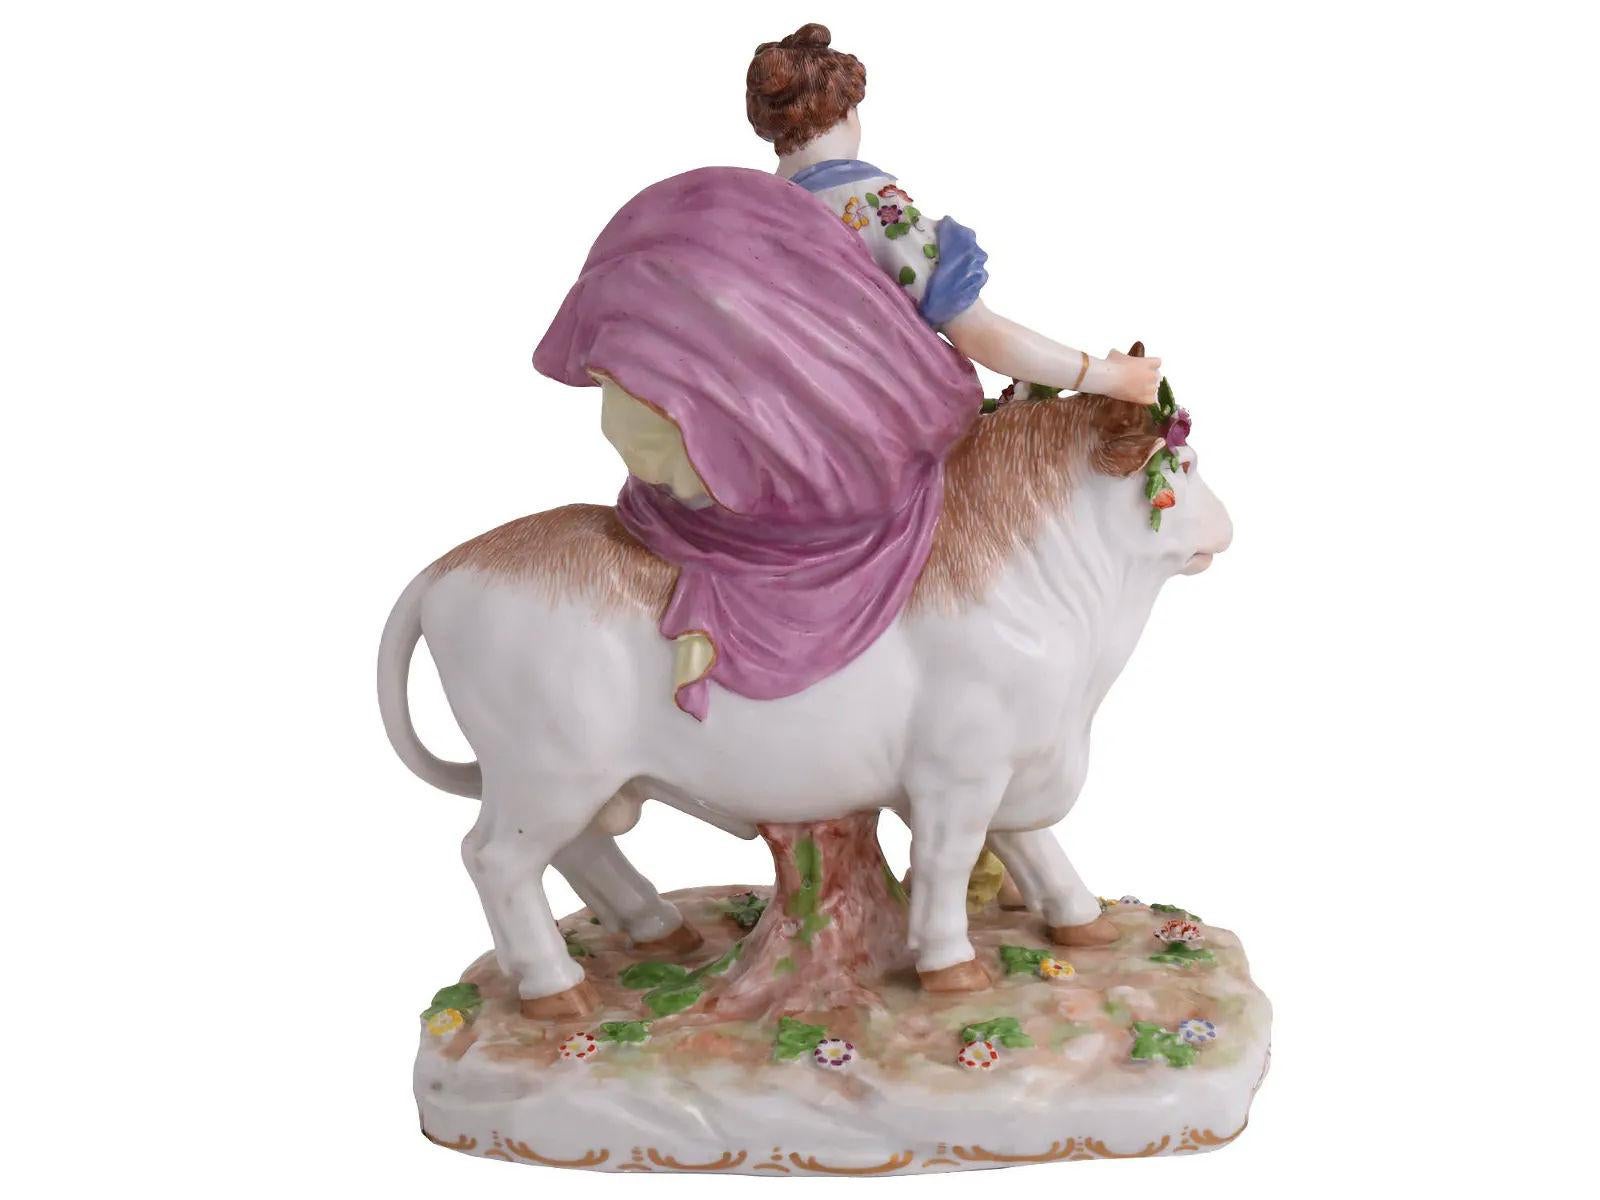 Our porcelain figurine depicting Europa riding a bull is a depiction of the legendary tale of the Rape of Europa from Metamorphoses by Ovid.

It tells of the abduction of Europa by Jupiter, disguised as a bull. Charmed by the bull’s good nature,